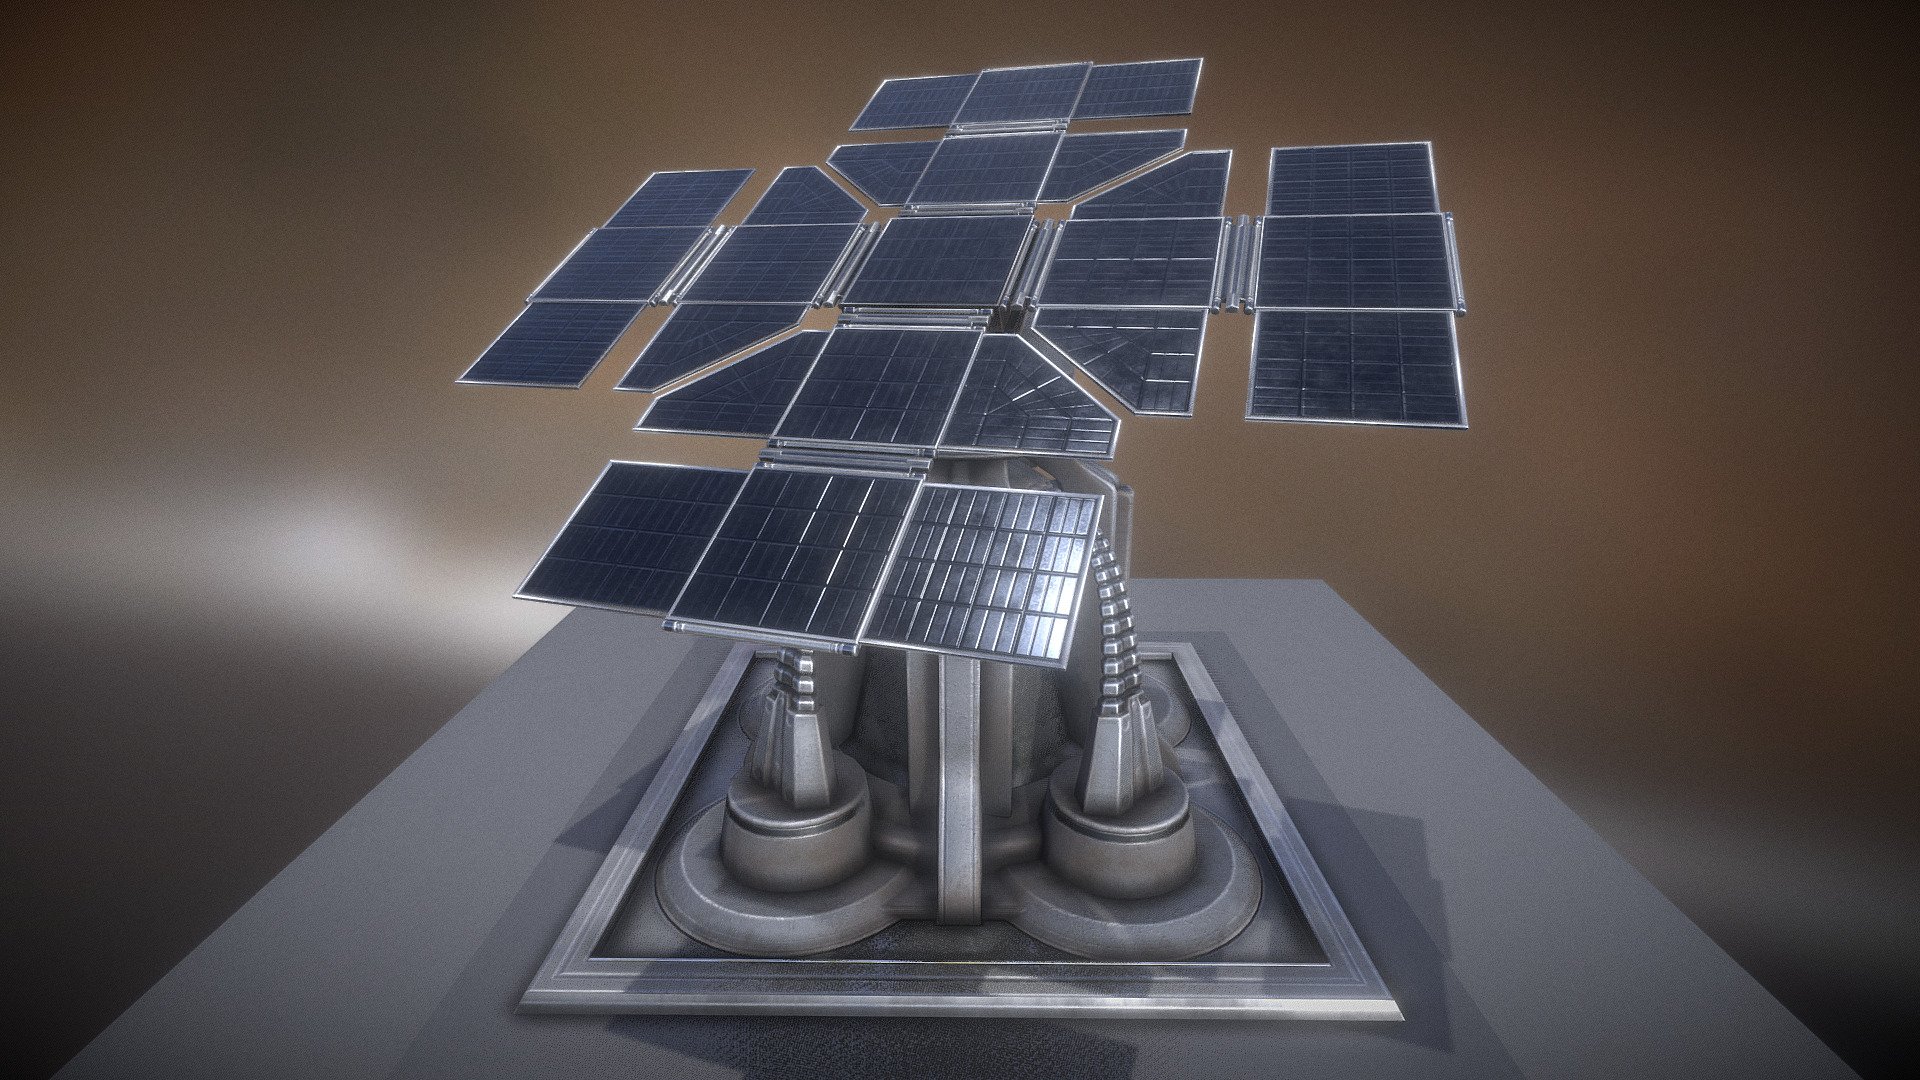 Here is my futuristic solar power tower with build-up animation. I modelled and texture this tower in 3d-coat. 









How it looks in Blender: https://www.youtube.com/watch?v=CXpXUXHccf4  

Created with Blender

3dhaupt.com - Futuristic Solar Power Tower - Buy Royalty Free 3D model by 3DHaupt (@dennish2010) 3d model